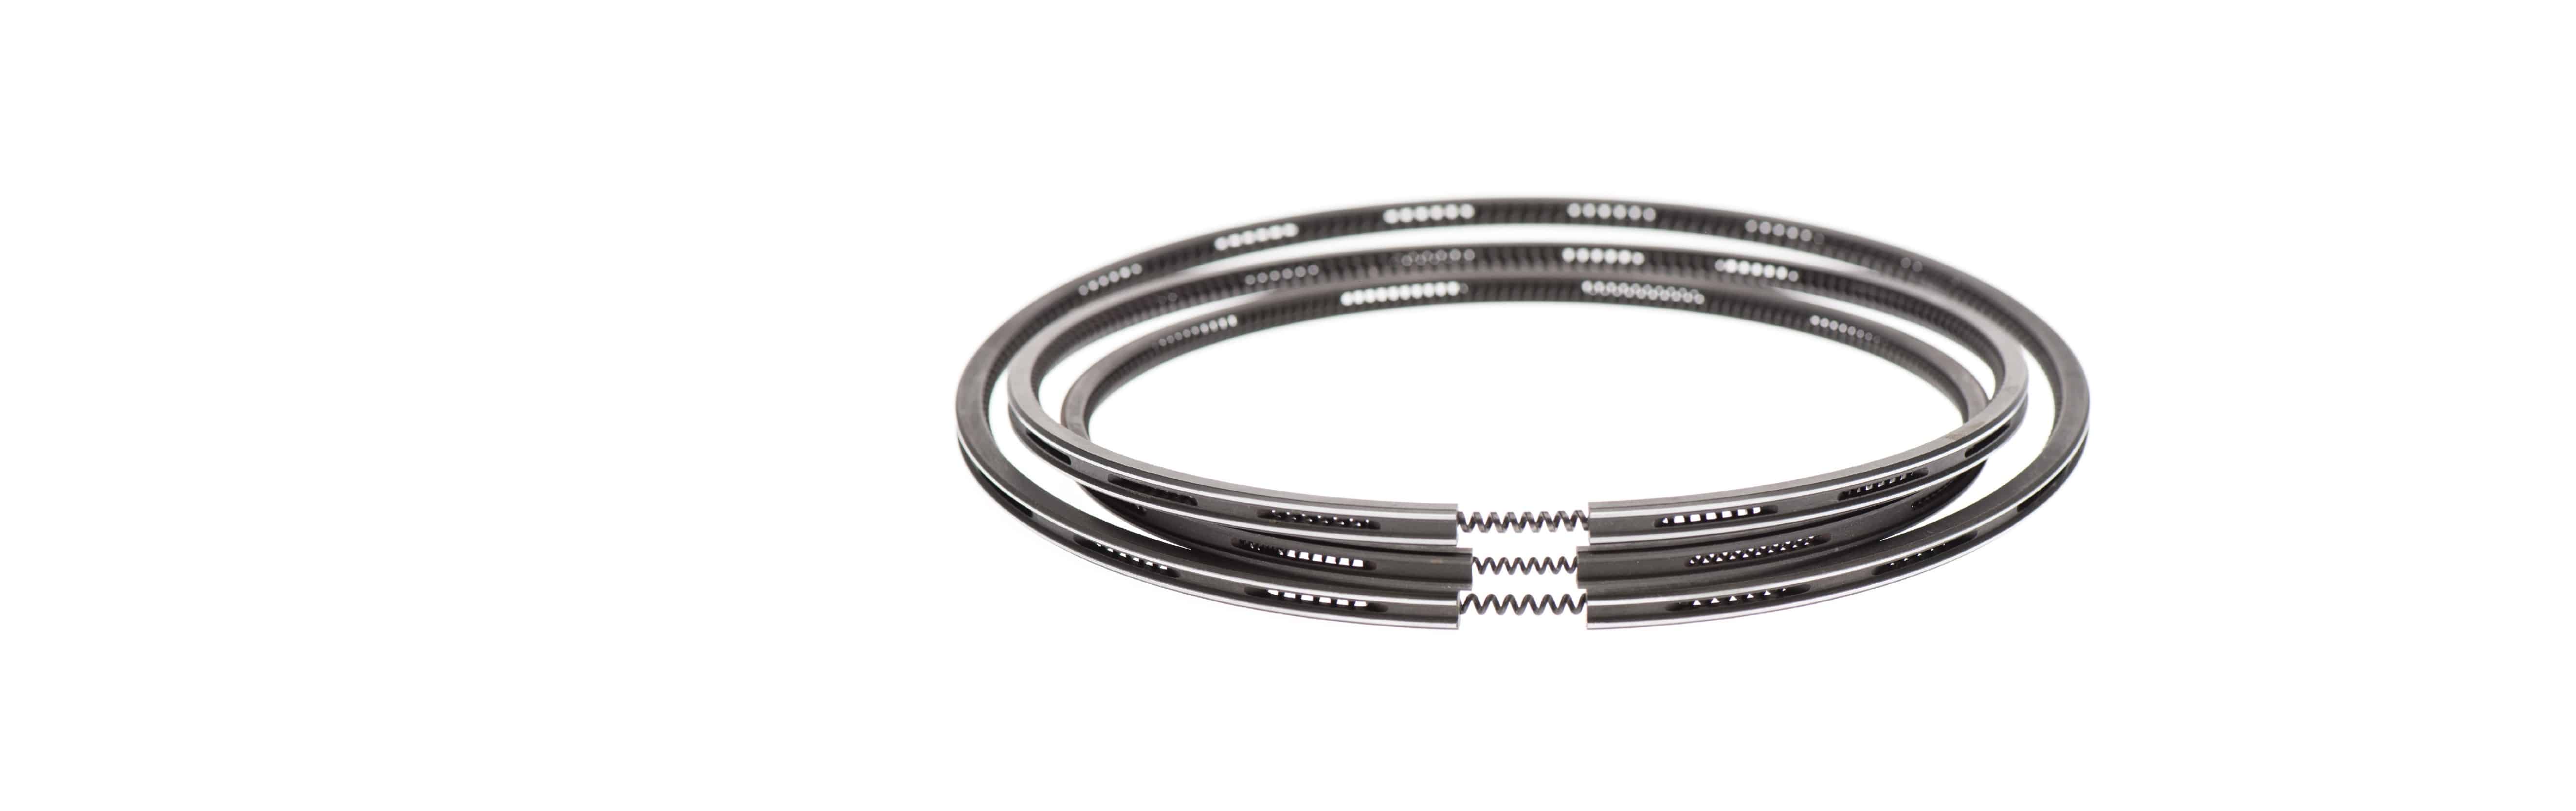 ENGINE PARTS, buy Types engine piston ring package cypr 80 piston ring on  China Suppliers Mobile - 170664849